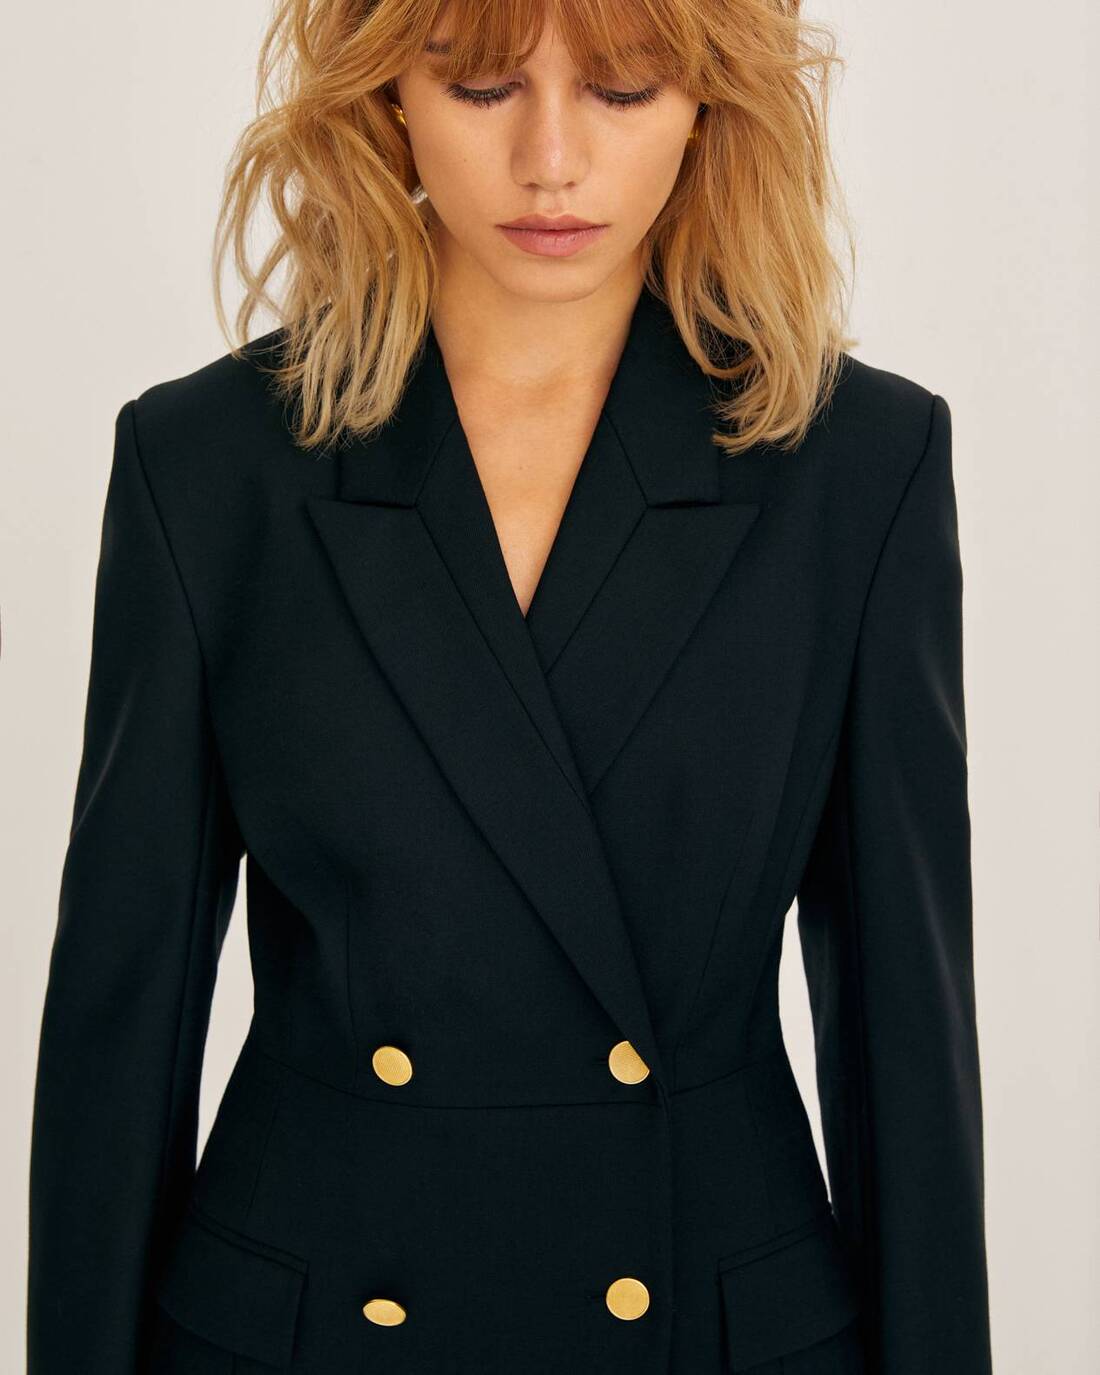 Double-breasted jacket with notched lapels